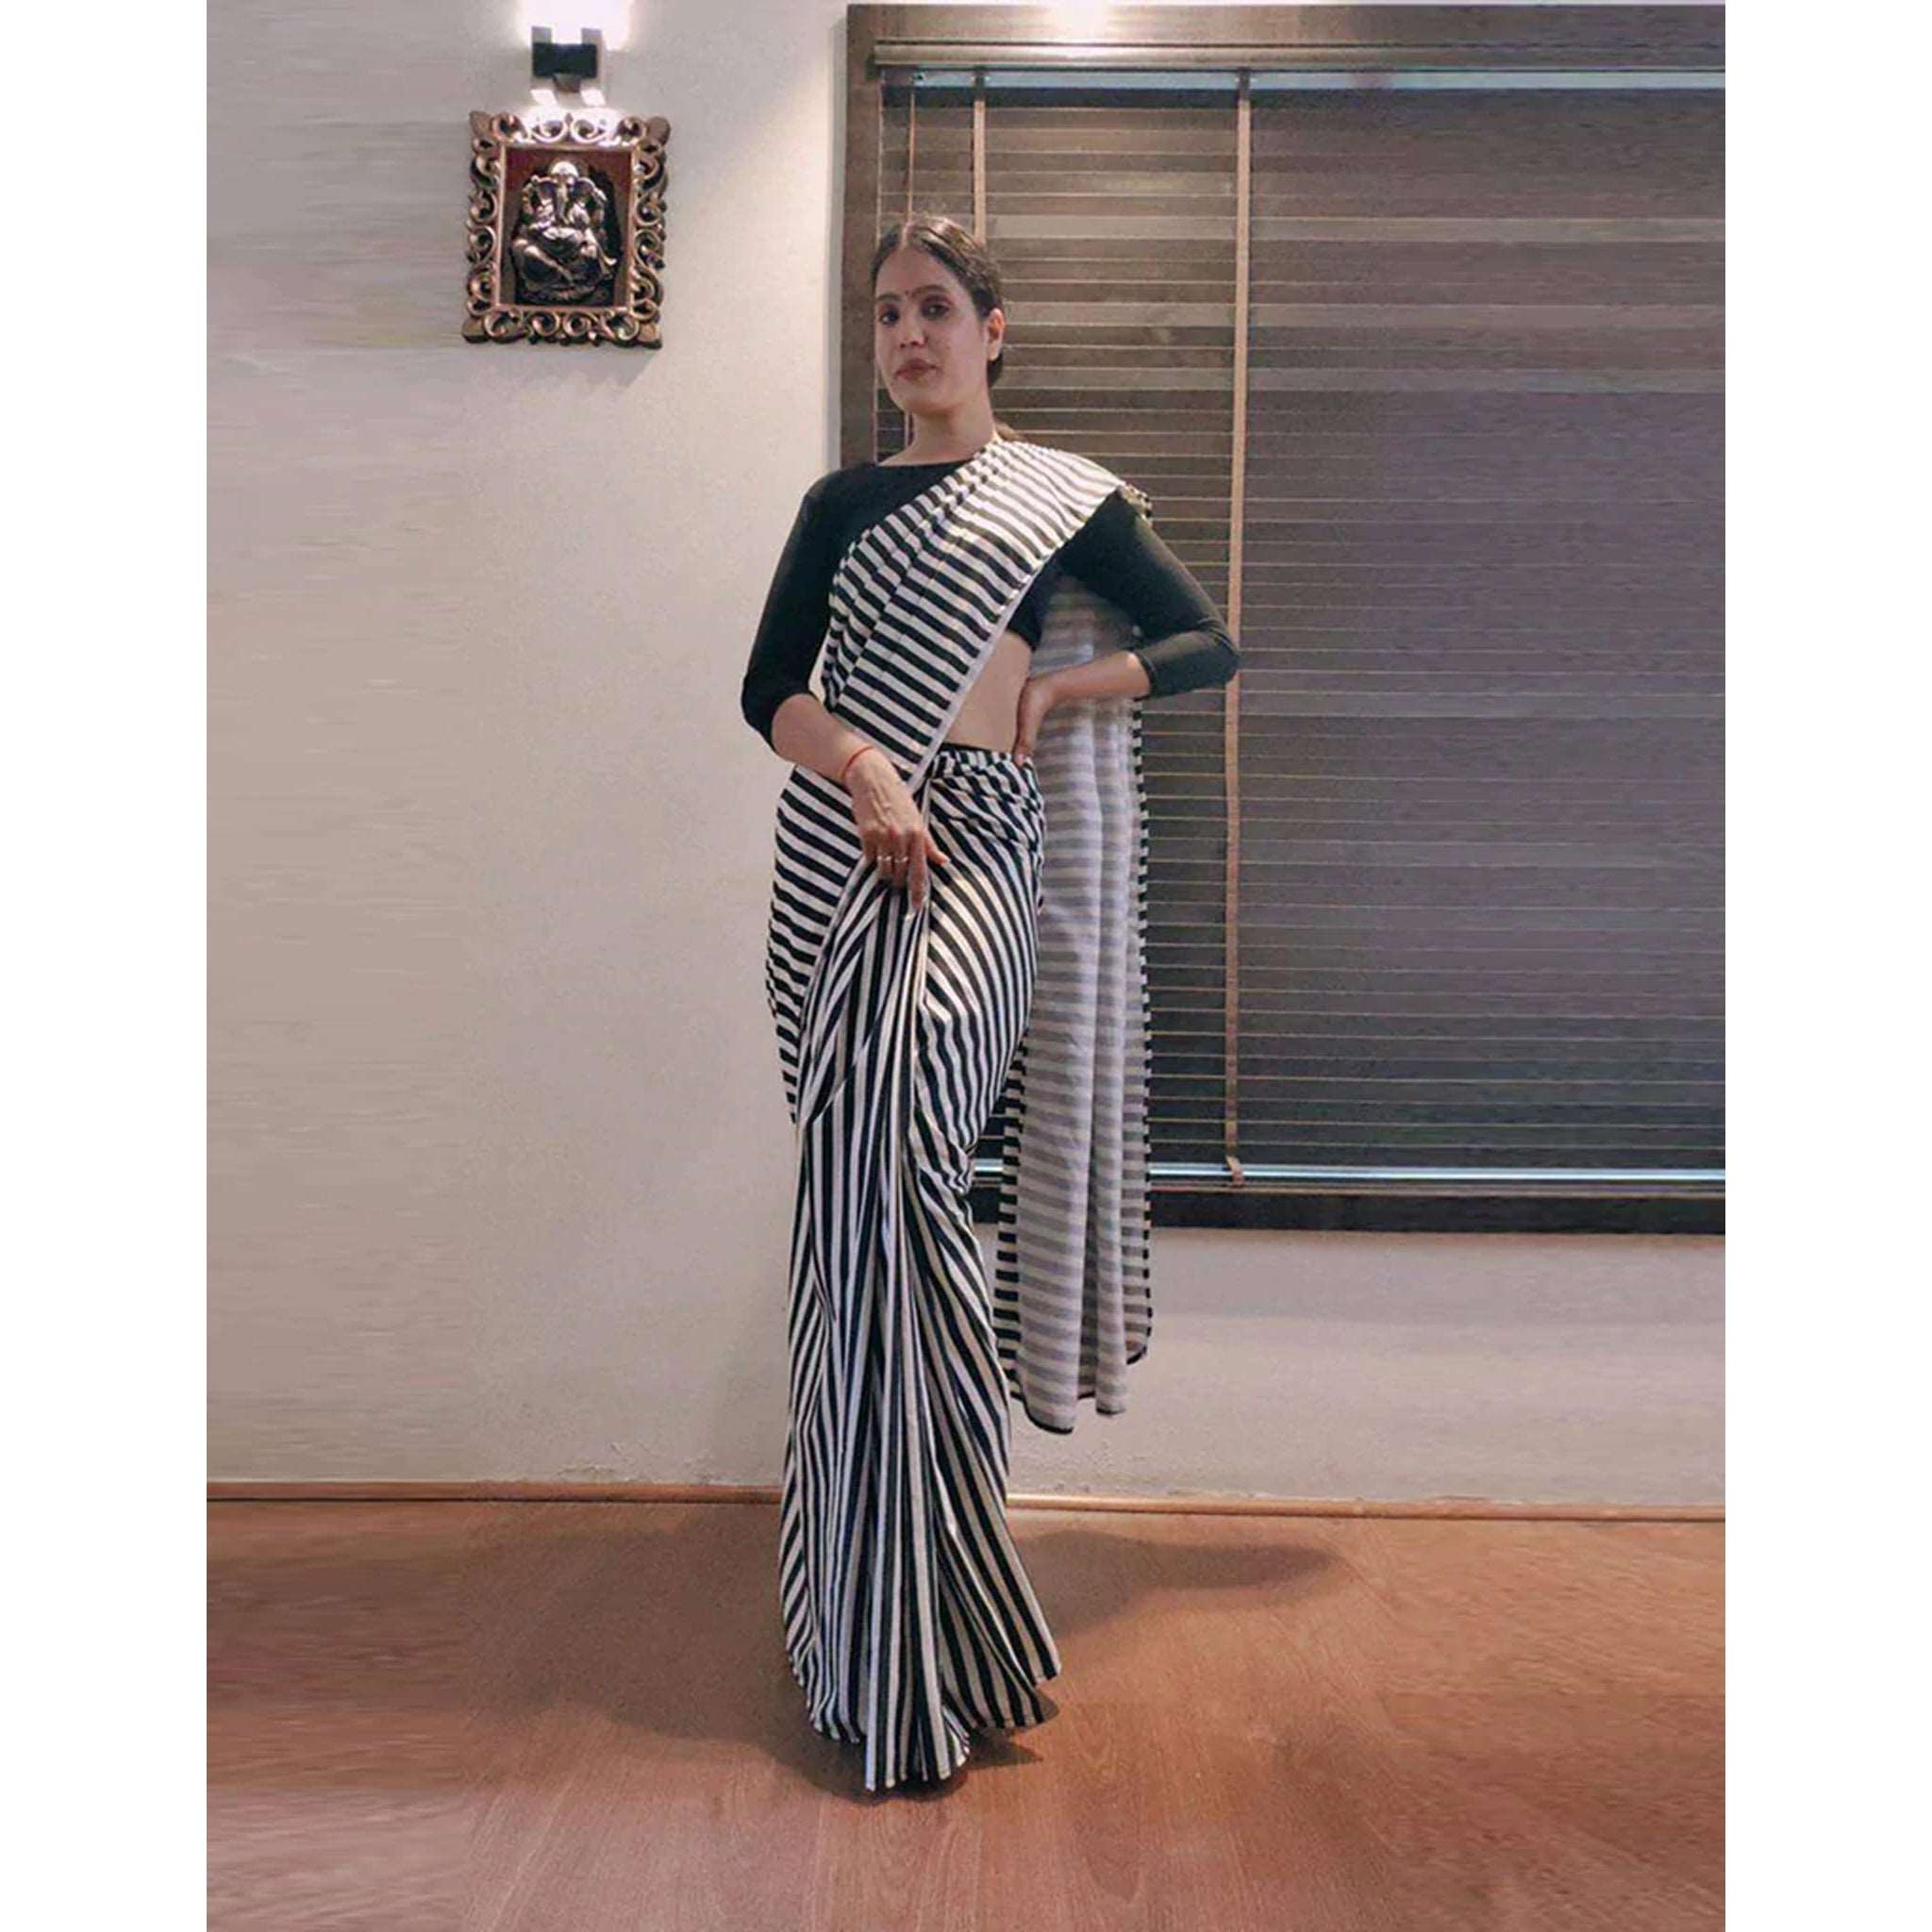 Black and White striped Ready to wear Georgette Saree - Colorful Saree